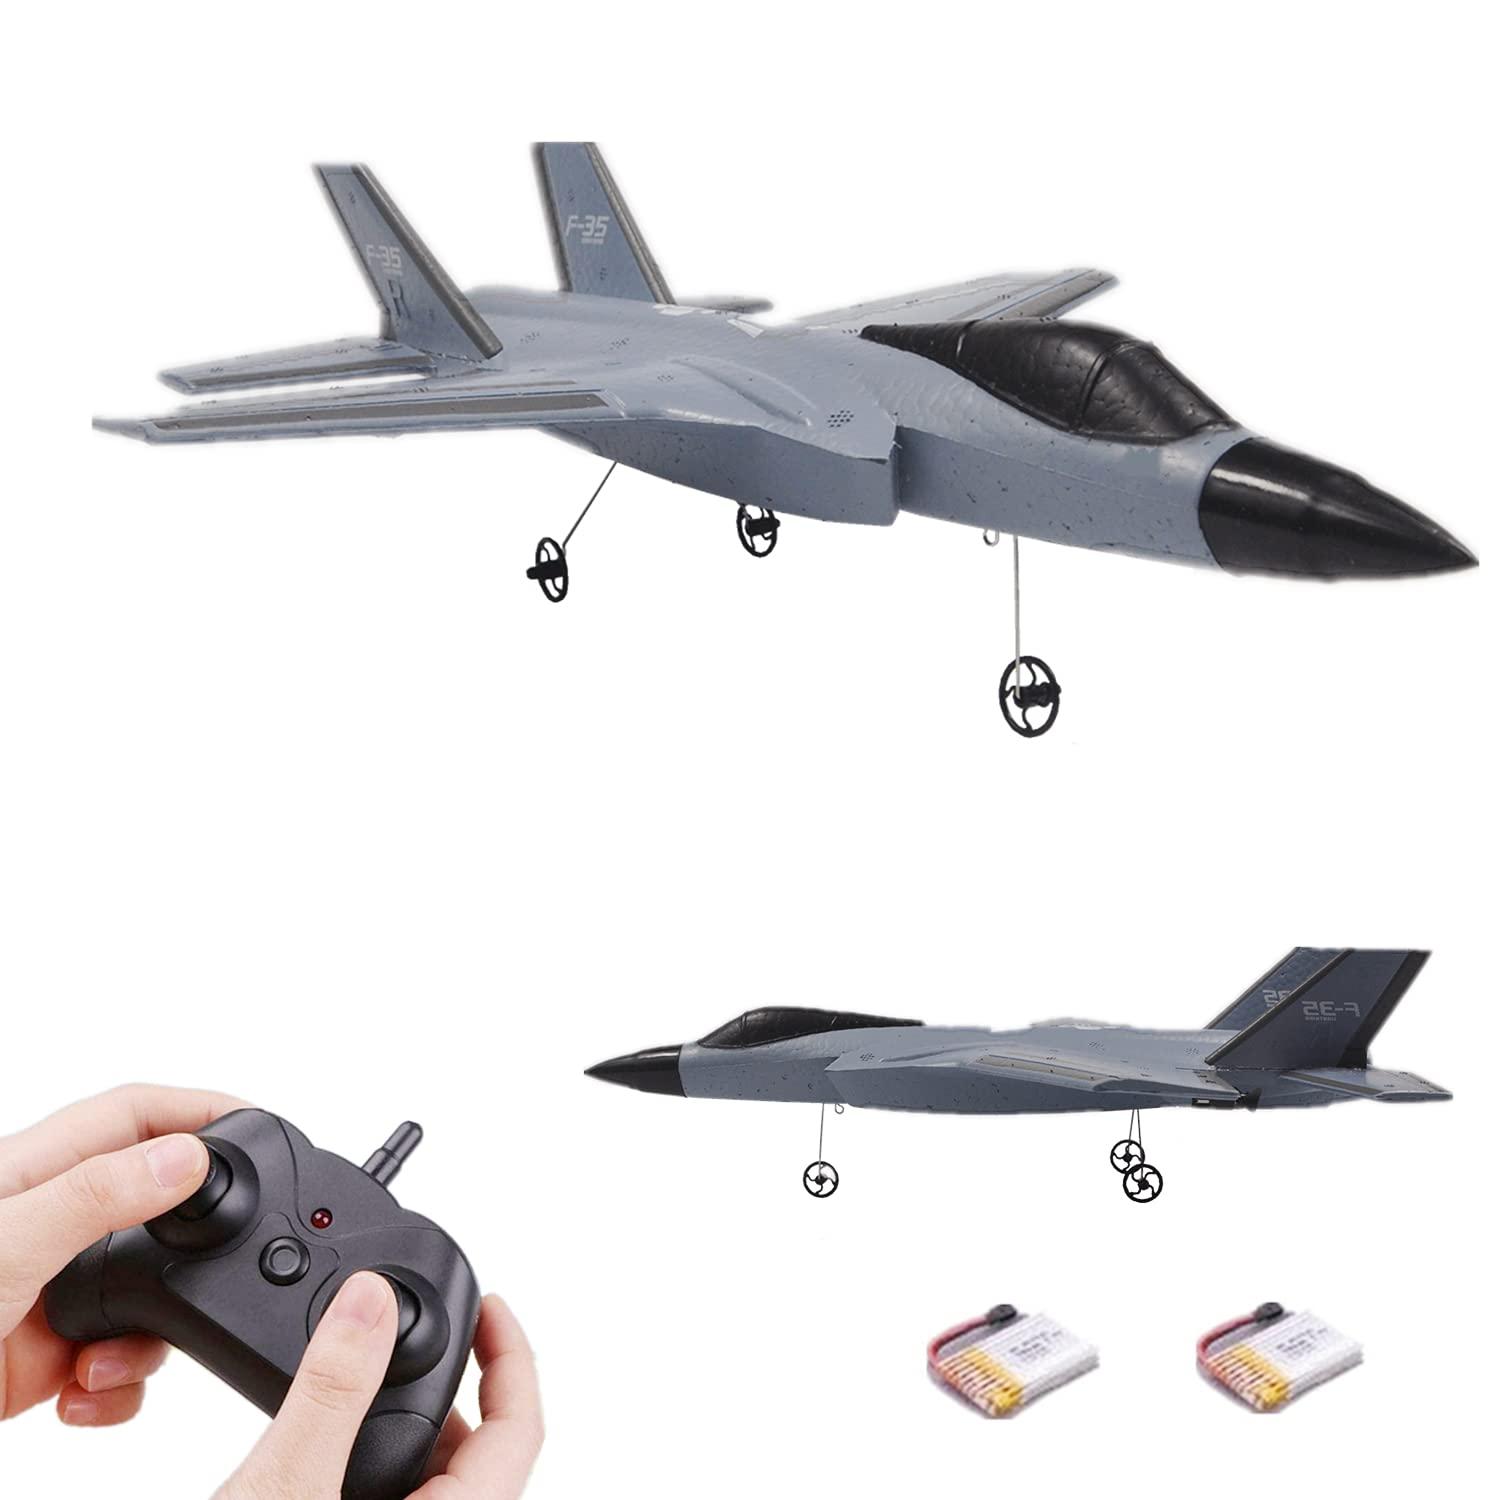 Flying Plane With Remote Control: Demystifying Remote-Controlled Flying Planes